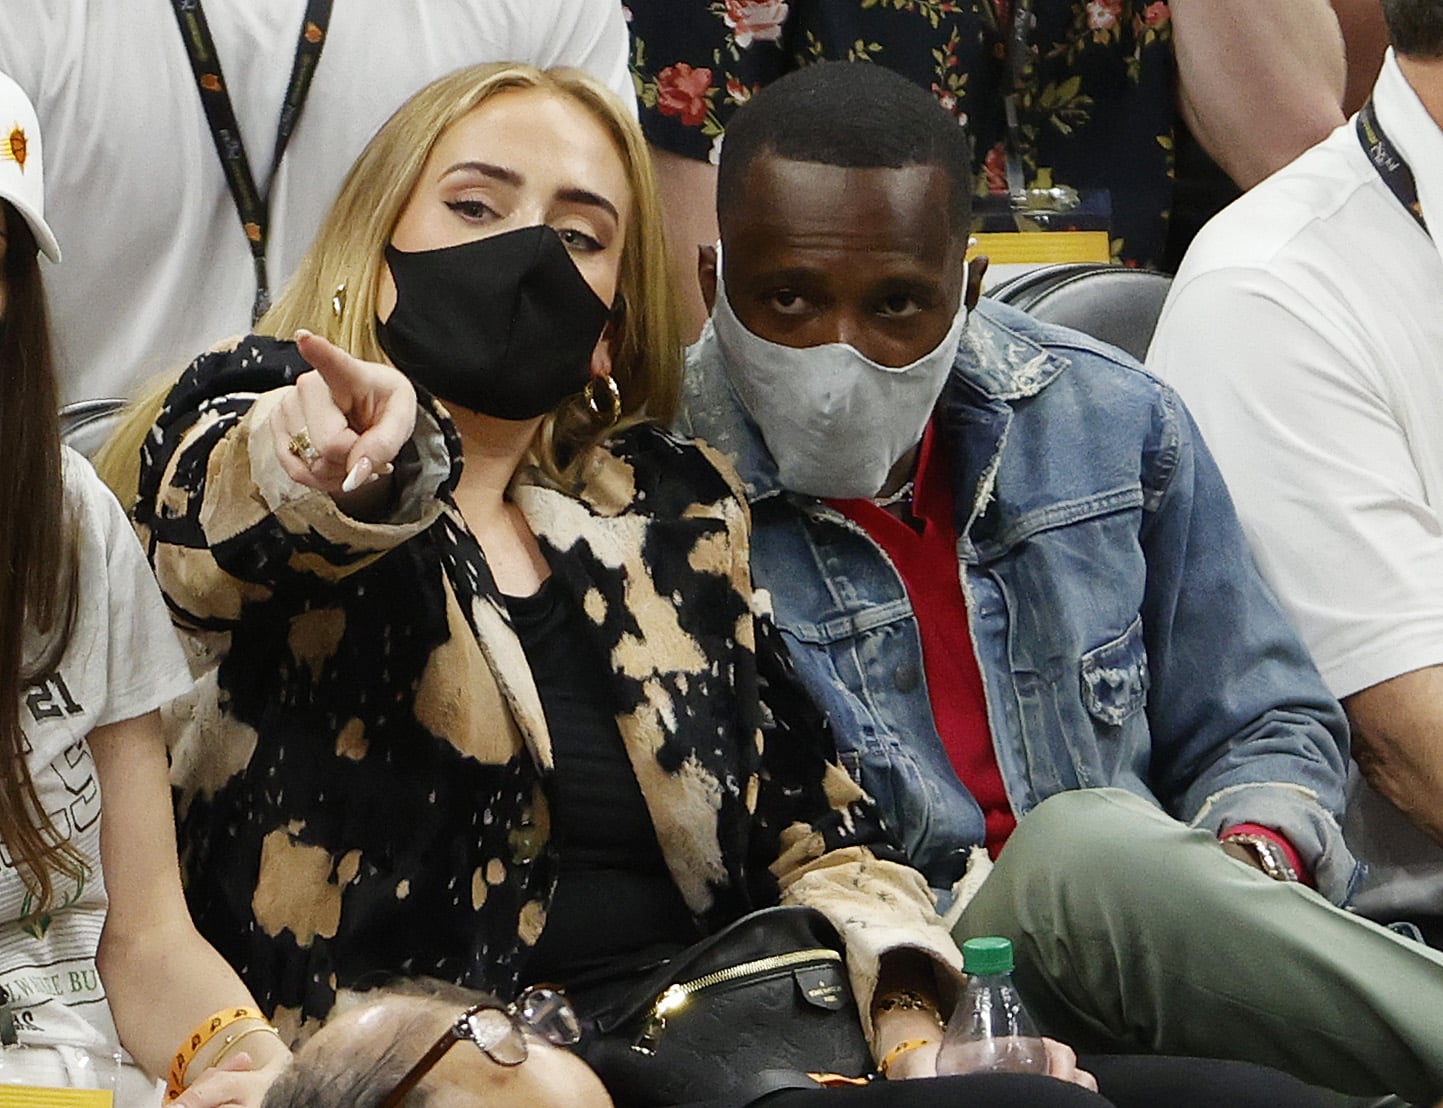 PHOENIX, ARIZONA - JULY 17: Singer Adele looks on next to Rich Paul during the first half in Game Five of the NBA Finals between the Milwaukee Bucks and the Phoenix Suns at Footprint Center on July 17, 2021 in Phoenix, Arizona. NOTE TO USER: User expressly acknowledges and agrees that, by downloading and or using this photograph, User is consenting to the terms and conditions of the Getty Images License Agreement.  (Photo by Christian Petersen/Getty Images)